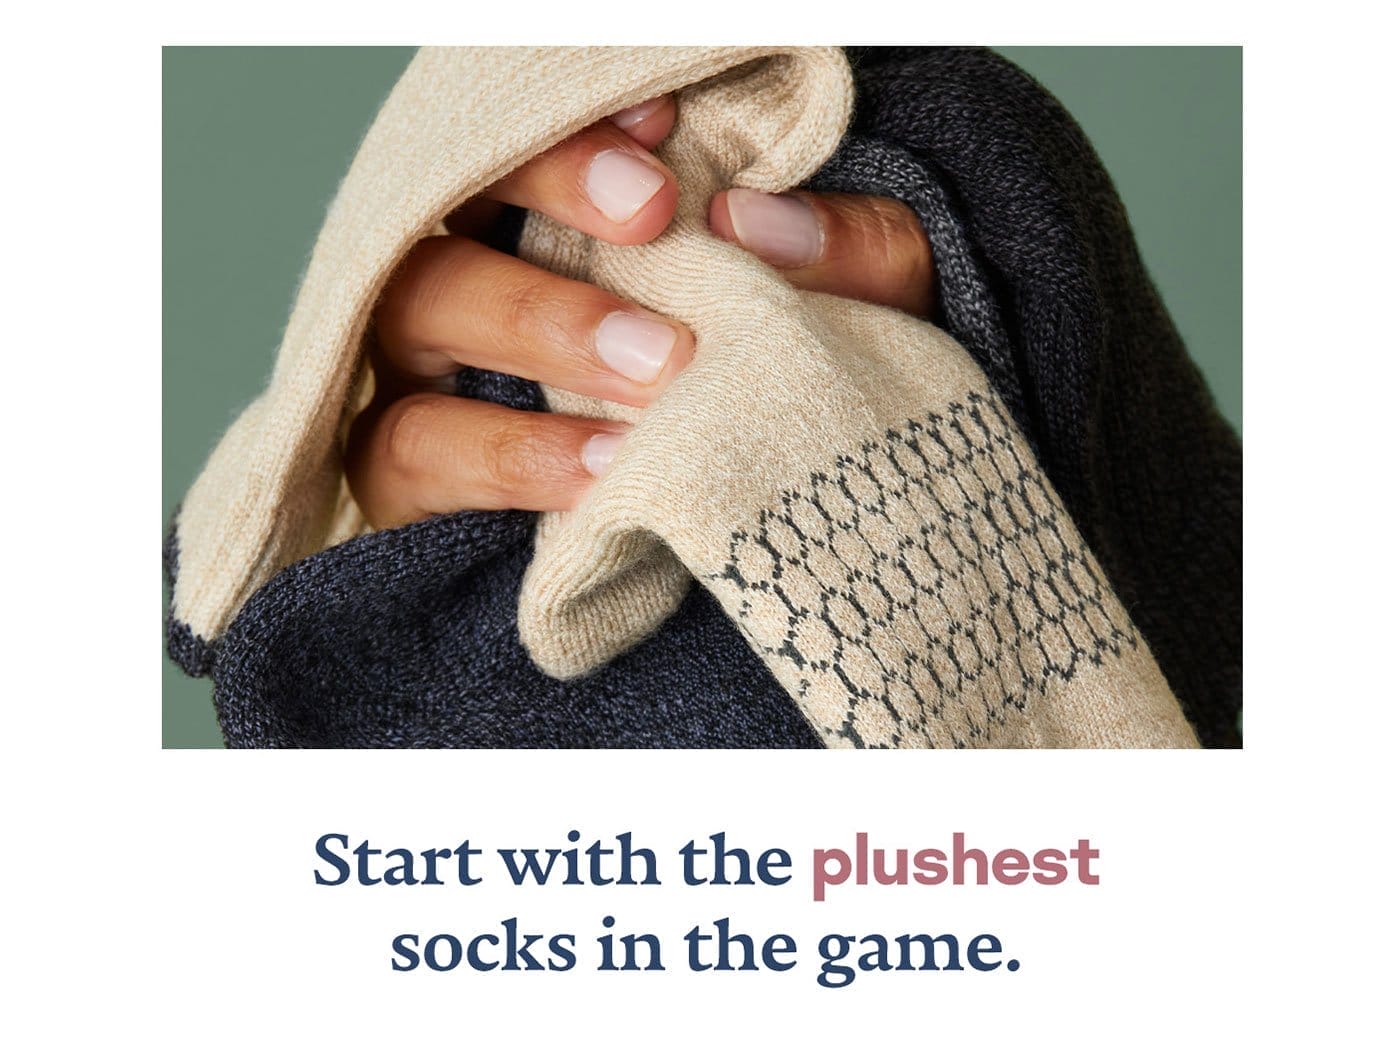 Start withthe plushest socks in the game.